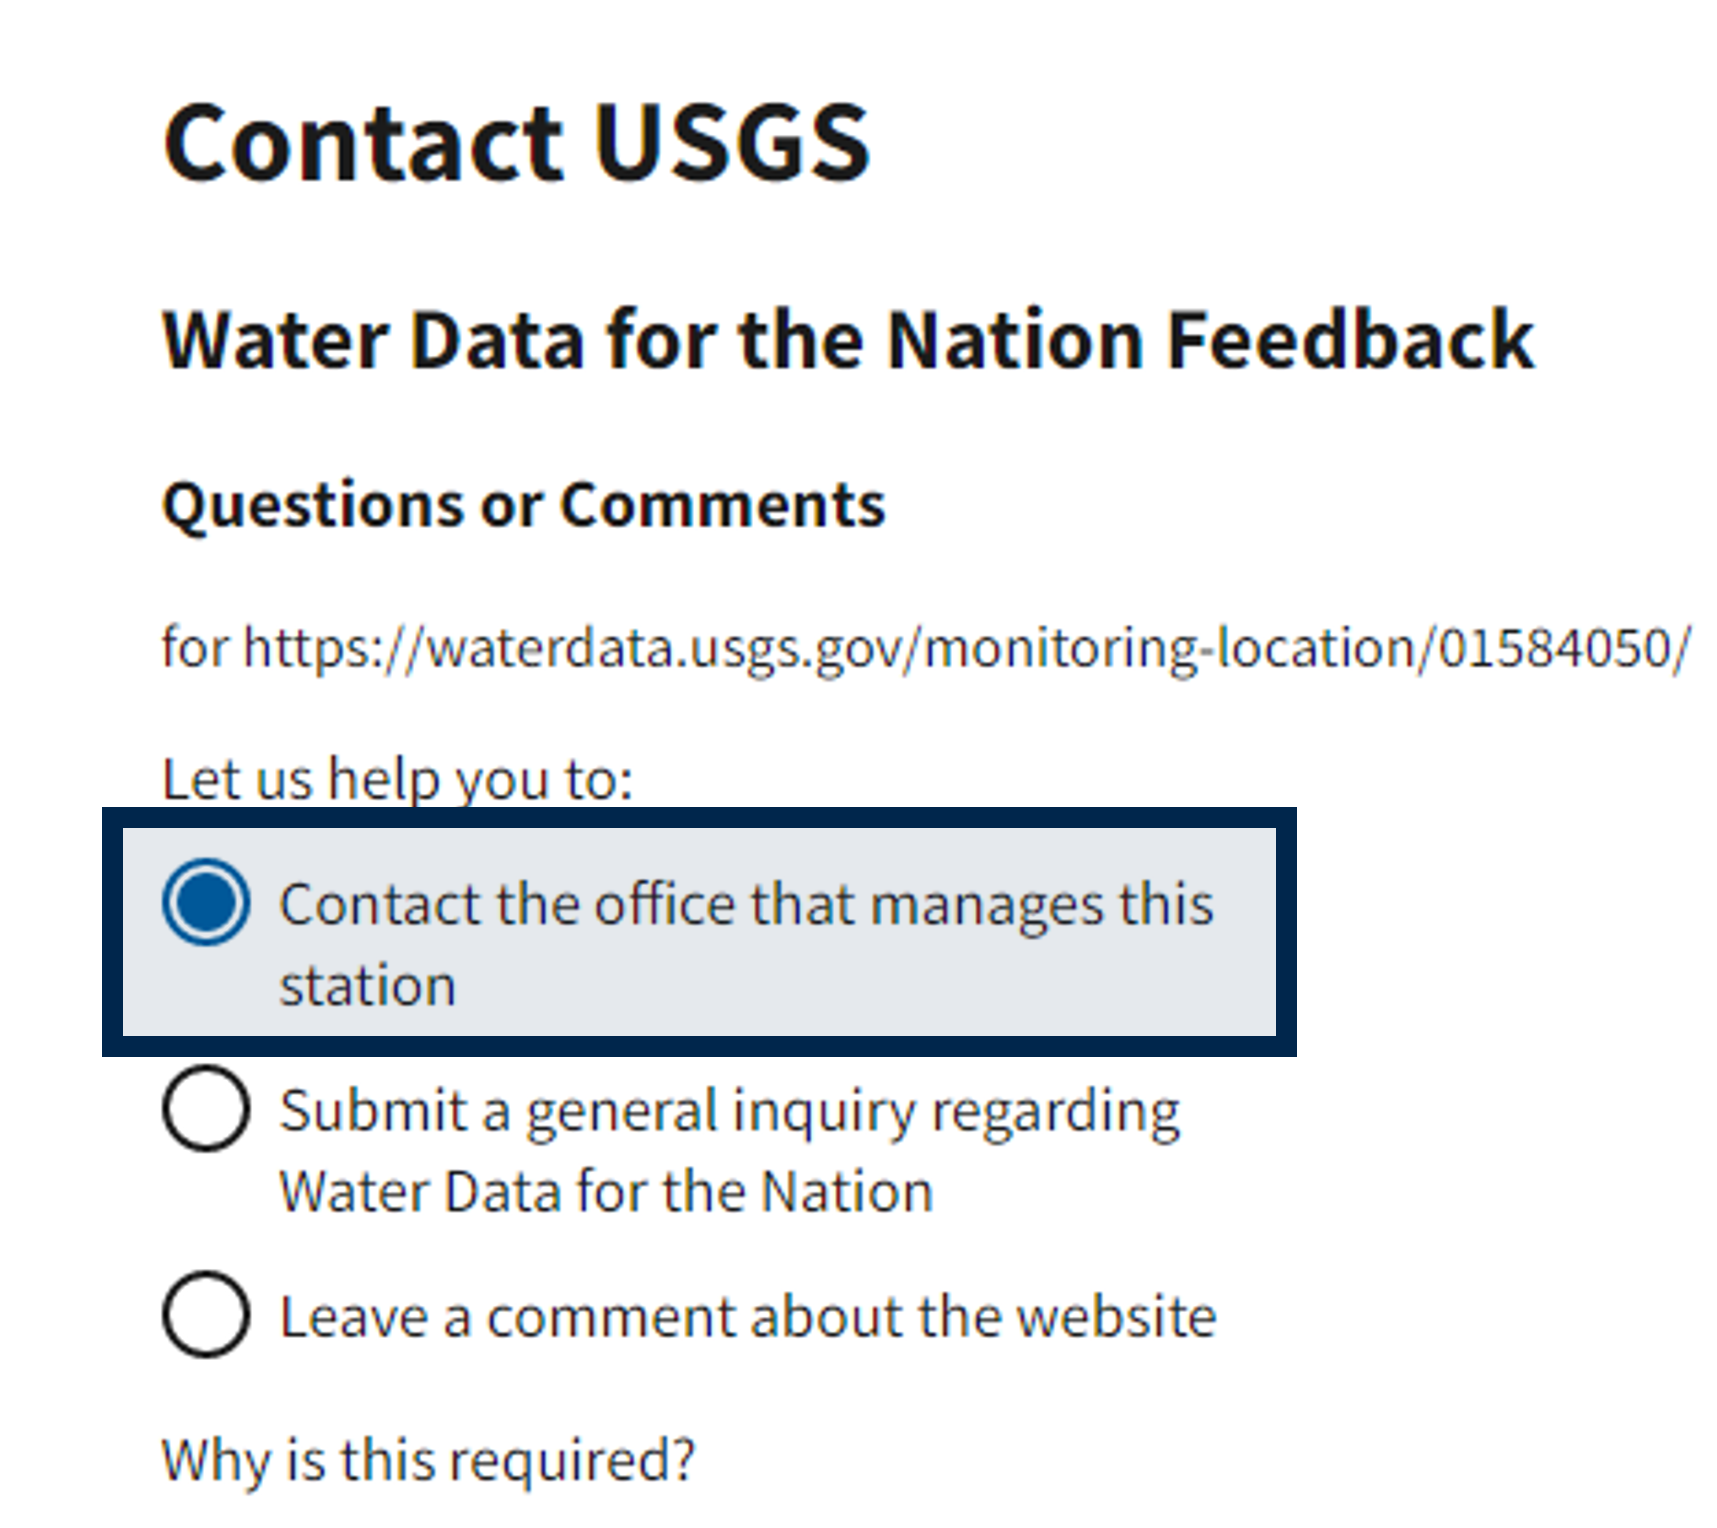 If you want the median data for a specific parameter at a specific location, click the &lsquo;Questions or Comments&rsquo; button on any monitoring location page (see previous screenshot) and select the &lsquo;Contact the office that manages this station&rsquo; option to talk to the Water Science Center associated with that monitoring location.